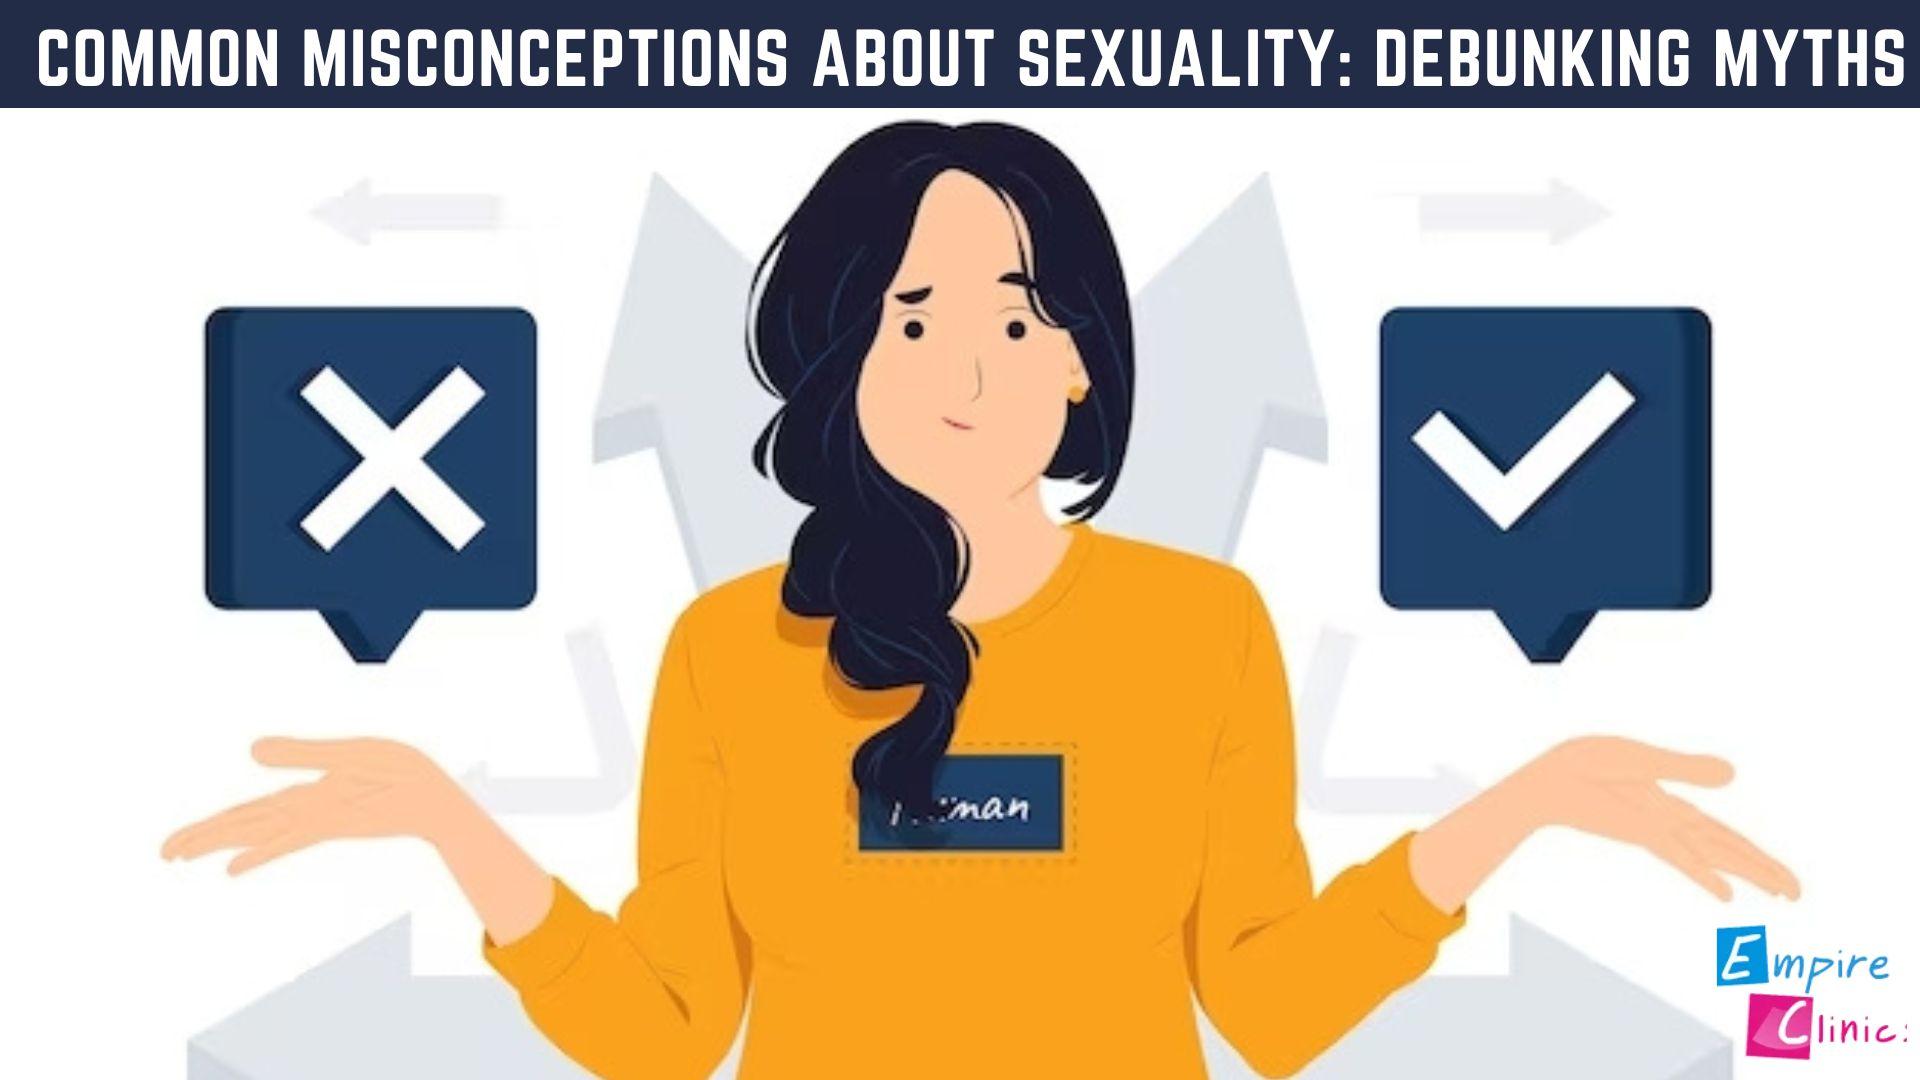 Common Misconceptions About Sexuality: Debunking Myths